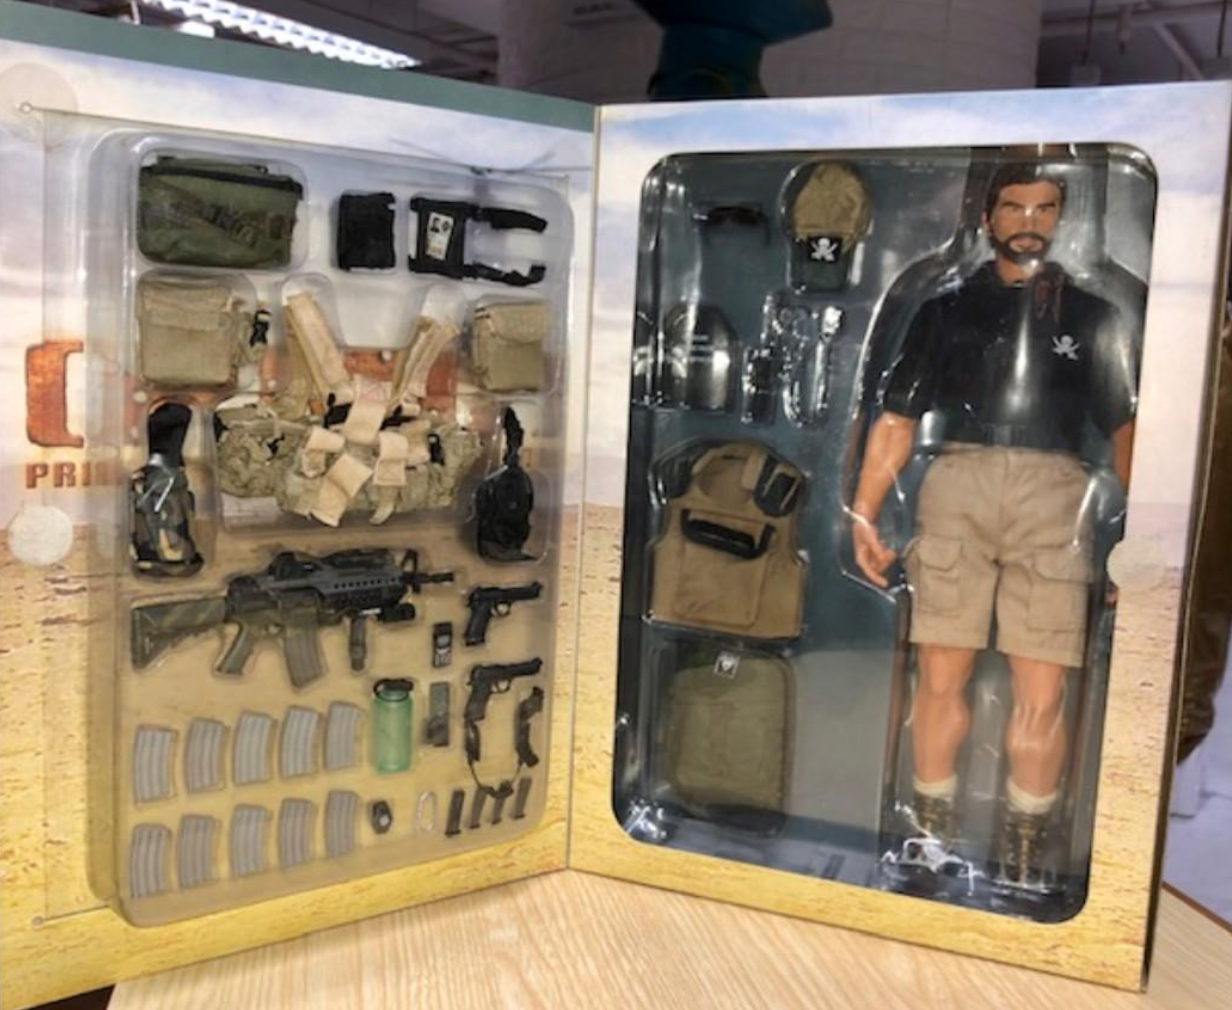 Hot Toys 1/6 12" PMC Private Military Contractors Action Figure